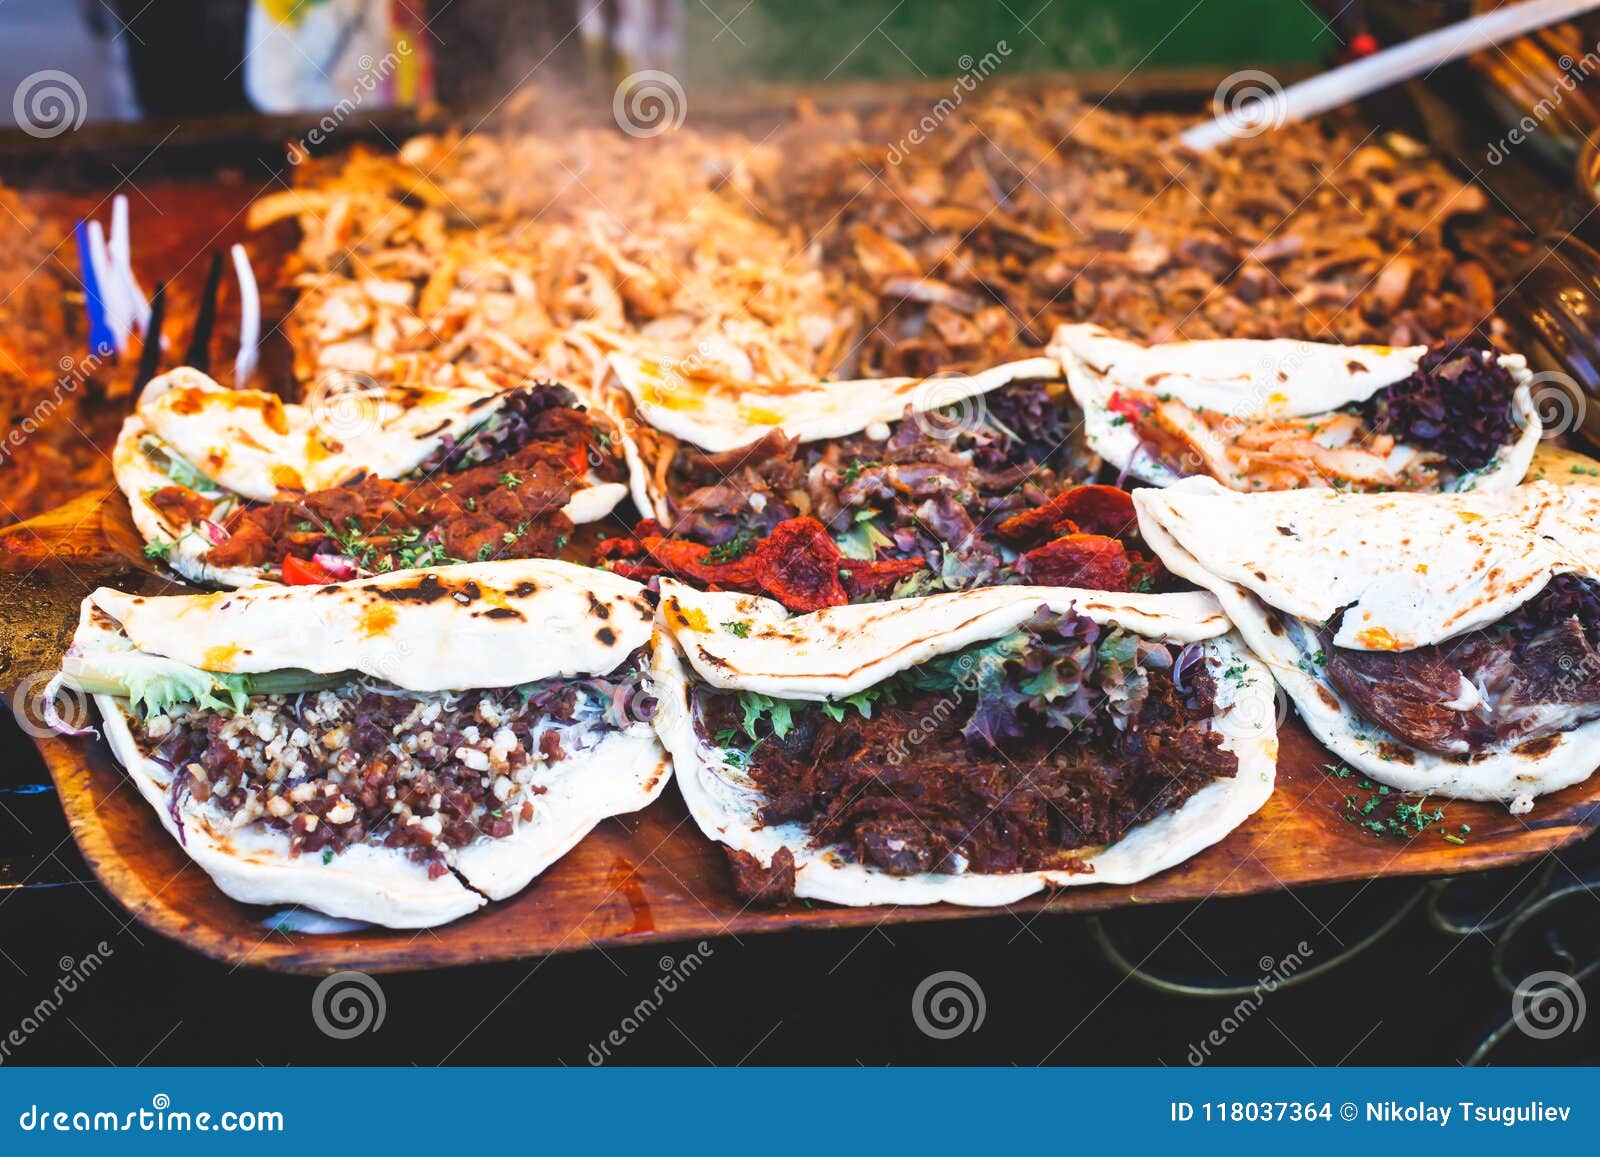 variety assortment of different traditional hungarian street food at one of the stalls in the streets of budapest, hungary , sprin